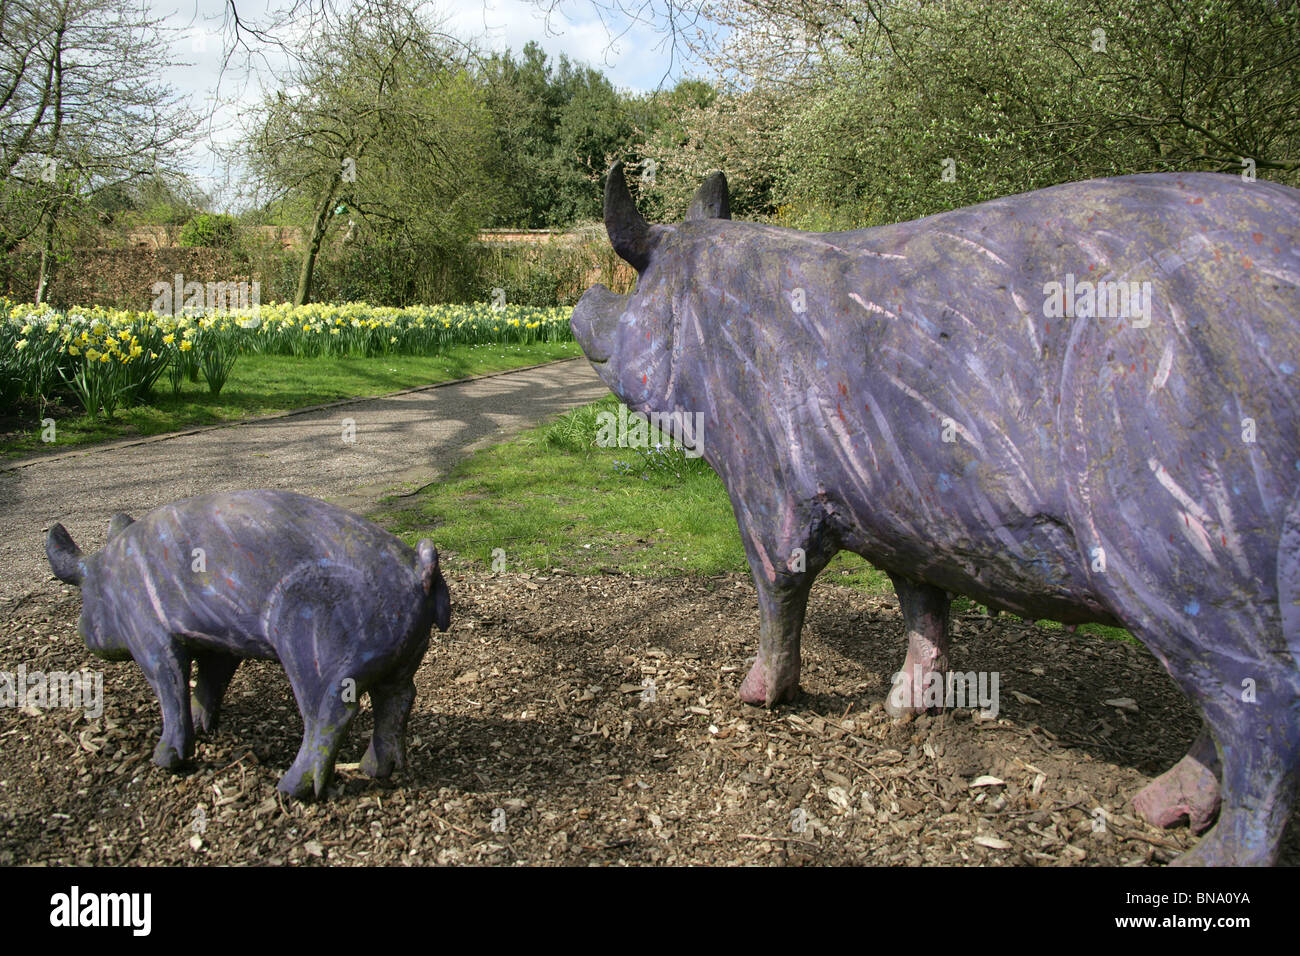 Norton Priory Museum & Gardens. Norton Priory Sculpture Trail includes bronze sculptures of a family of purple pigs. Stock Photo